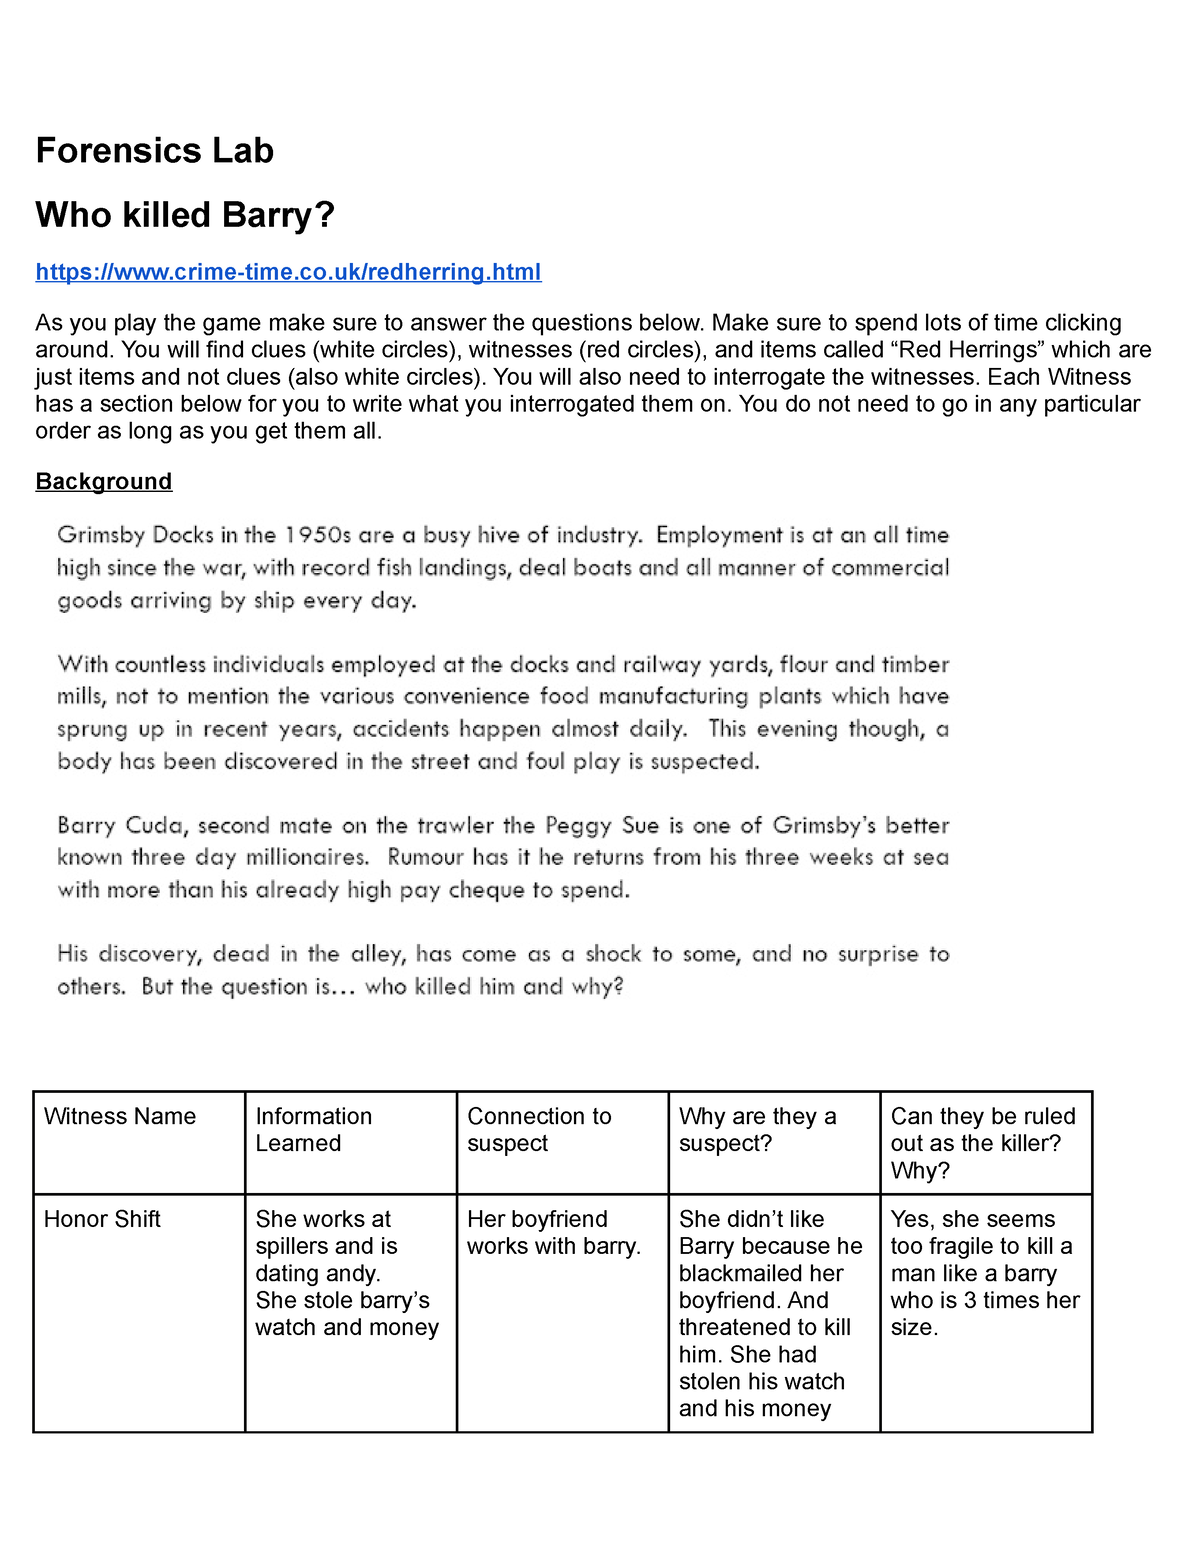 who-killed-barry-mystery-game-find-out-who-killed-barry-forensics-lab-who-killed-barry-studocu